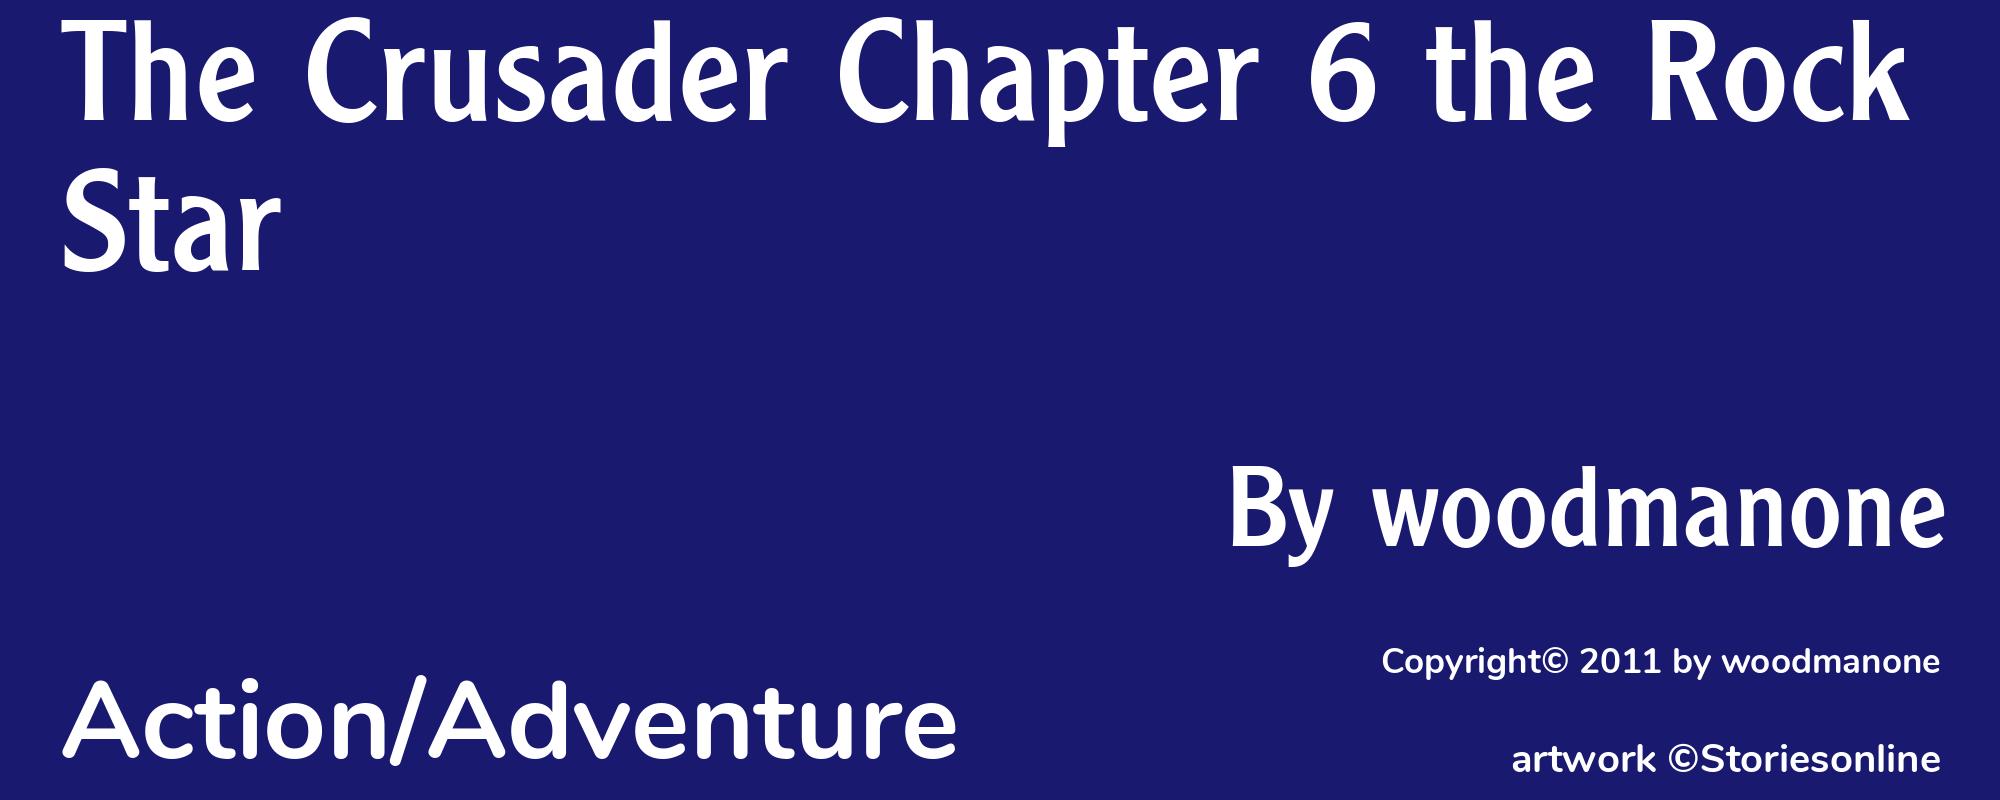 The Crusader Chapter 6 the Rock Star - Cover